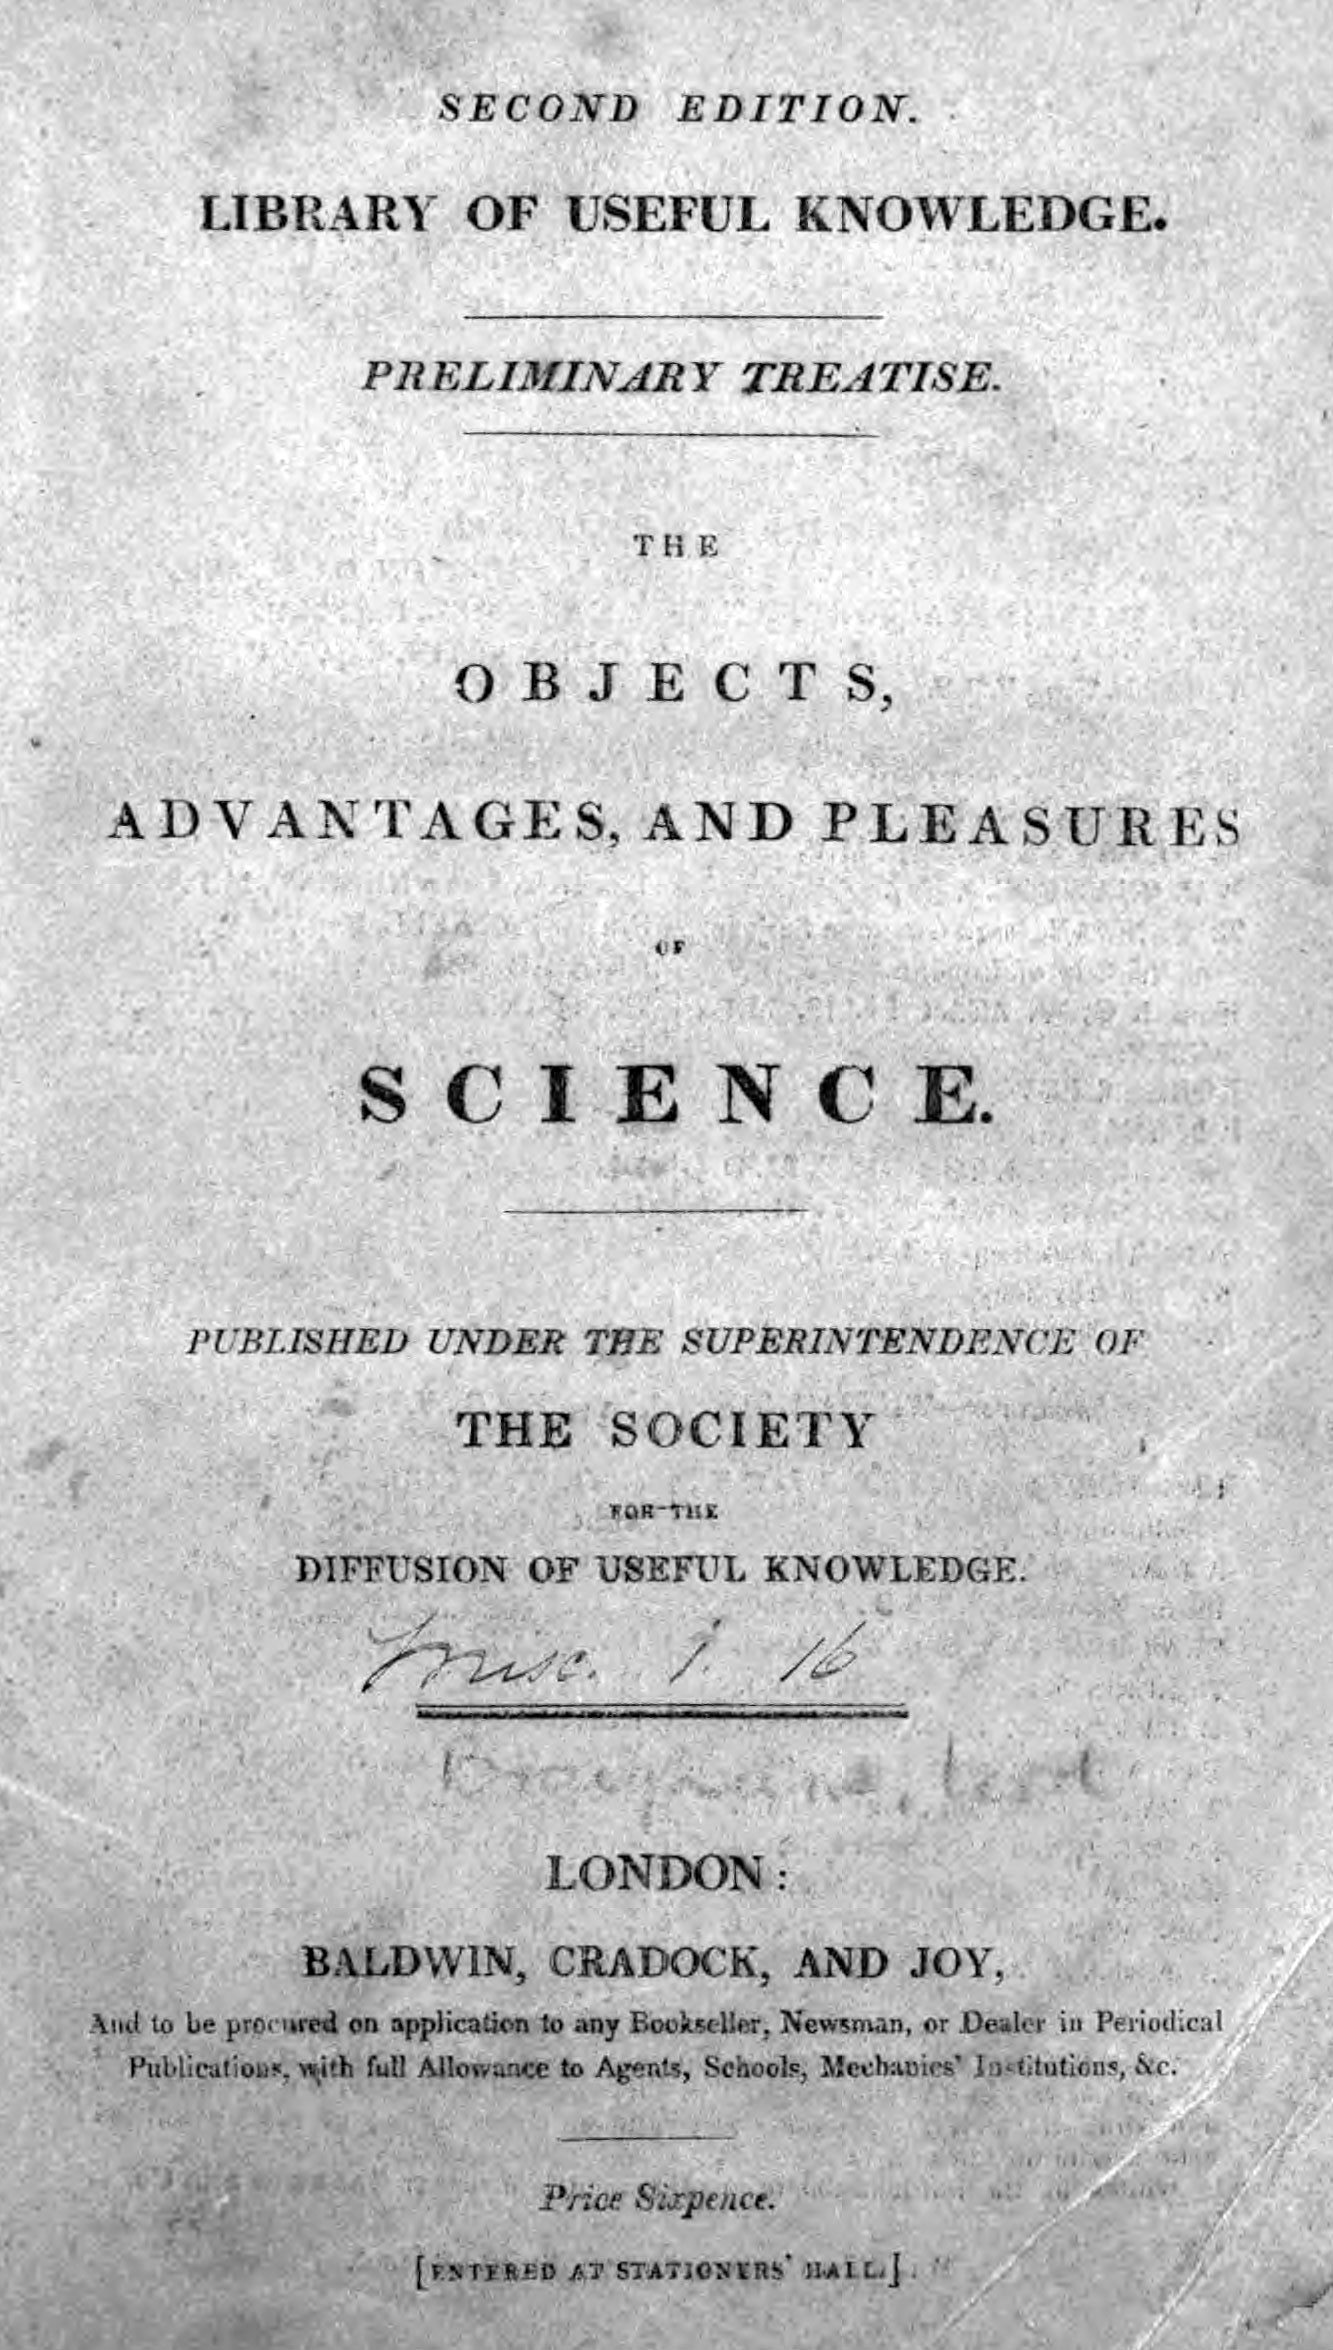 Brougham, A discourse of the objects, advantages, and pleasures of science (1827)